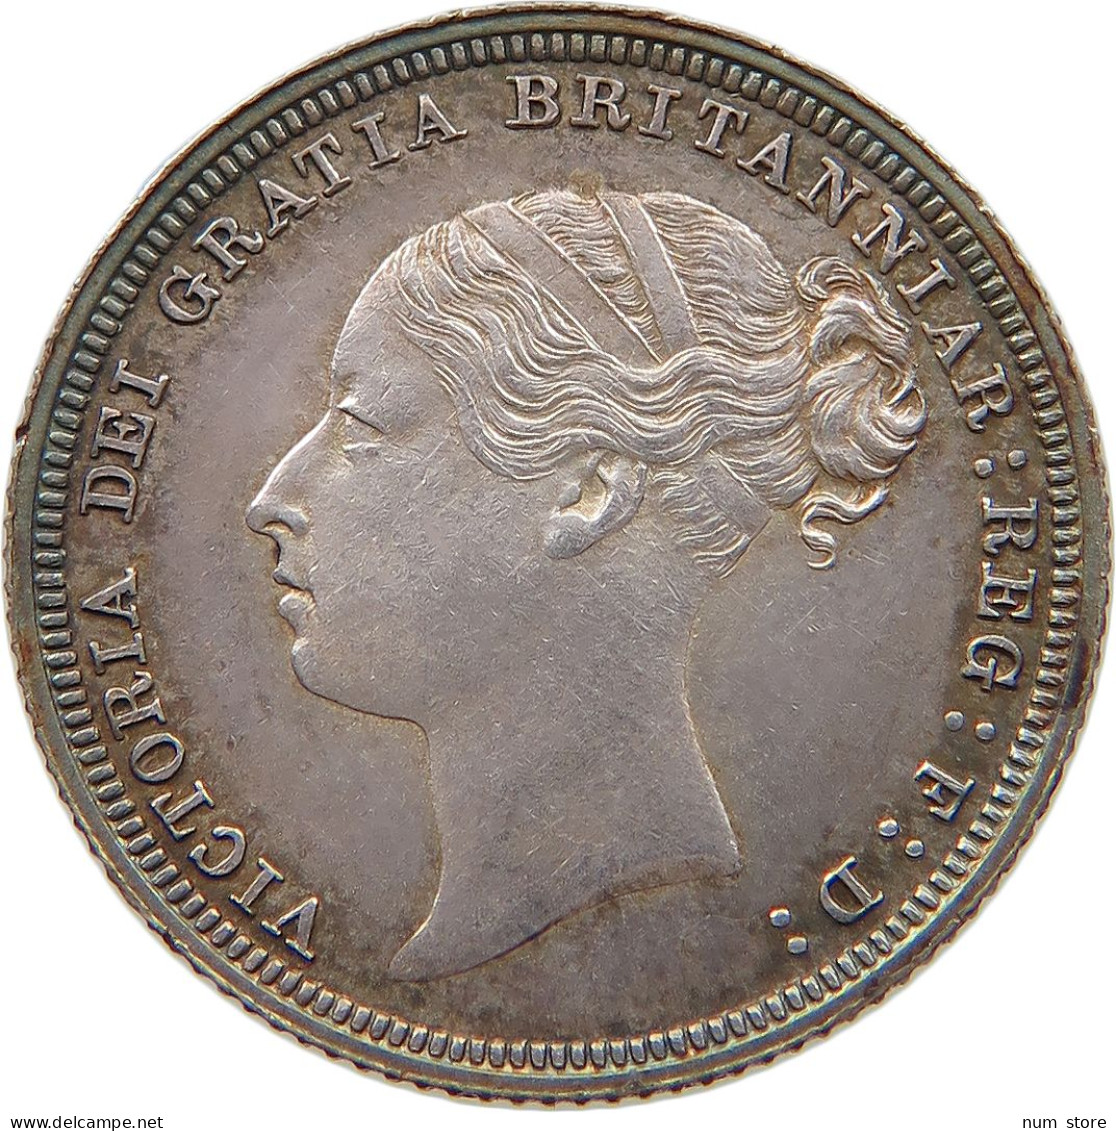 GREAT BRITAIN SIXPENCE 1881 Victoria 1837-1901 #t115 0391 - H. 6 Pence